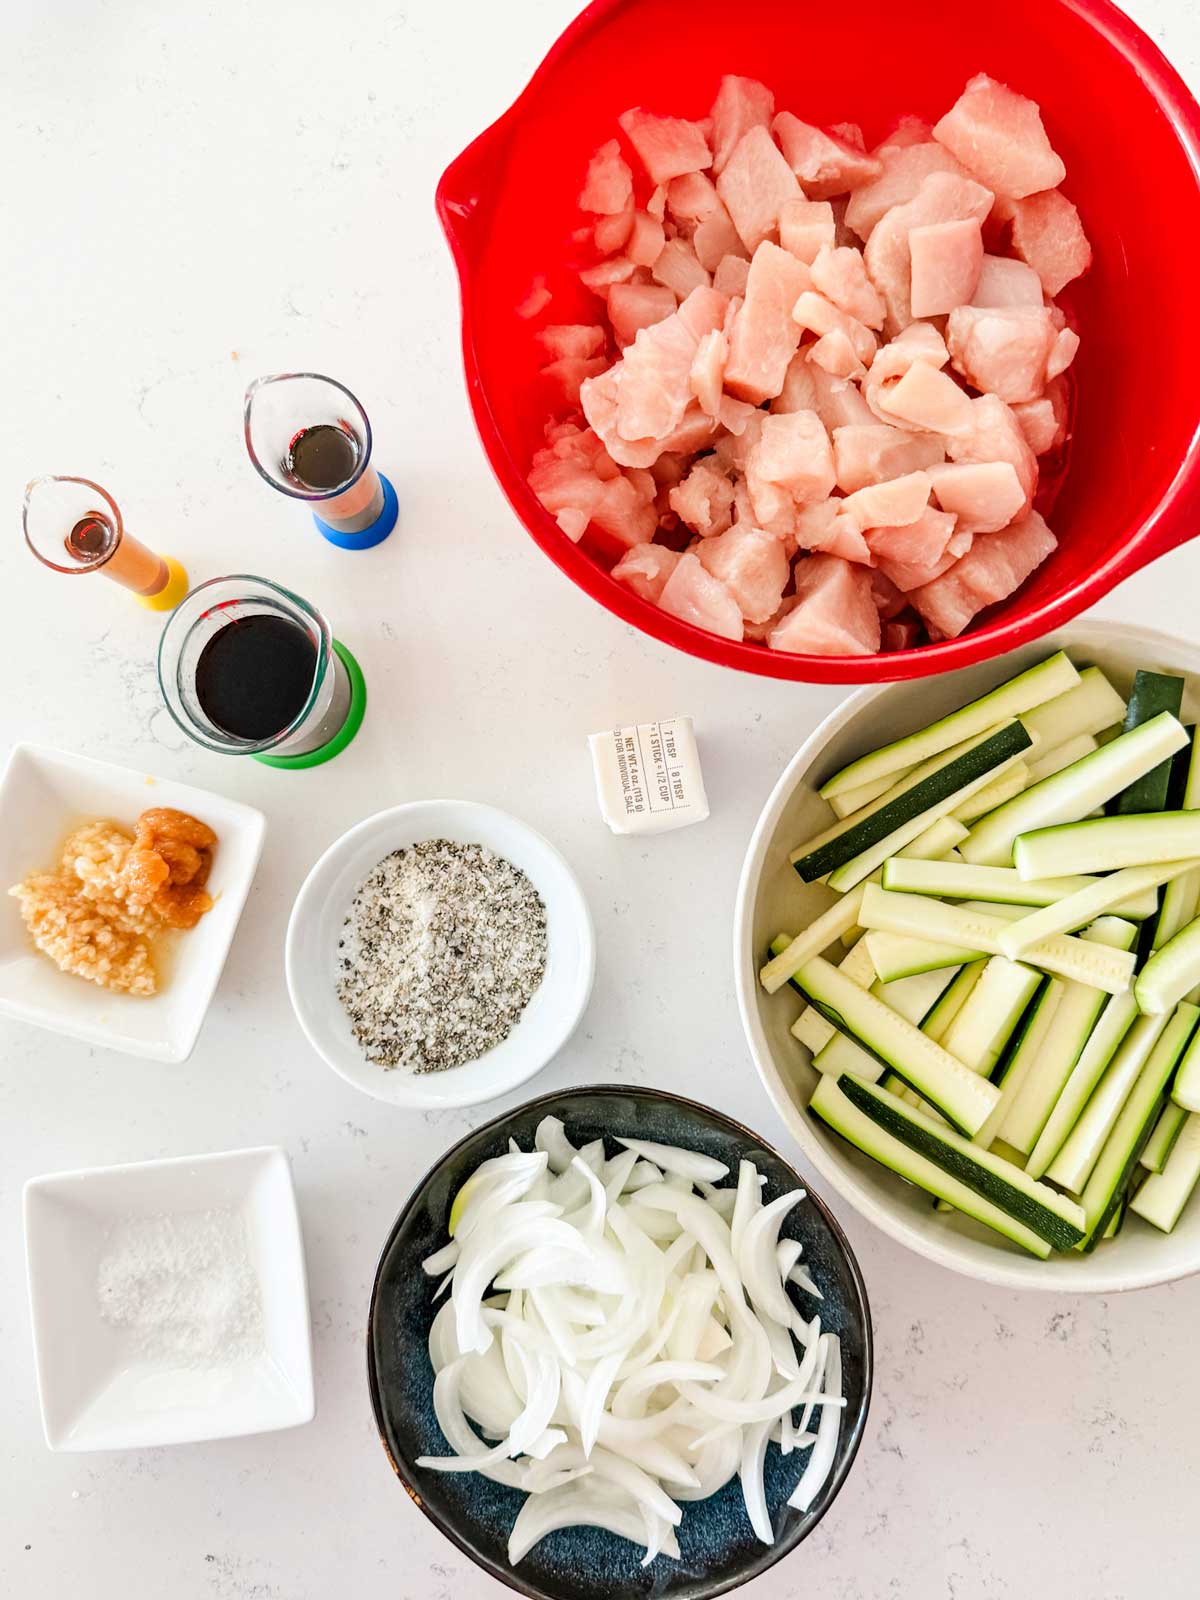 Overhead photo of chicken, salt, pepper, soy sauce, butter, minced garlic, sesame oil, ginger, zucchini, and onion.

